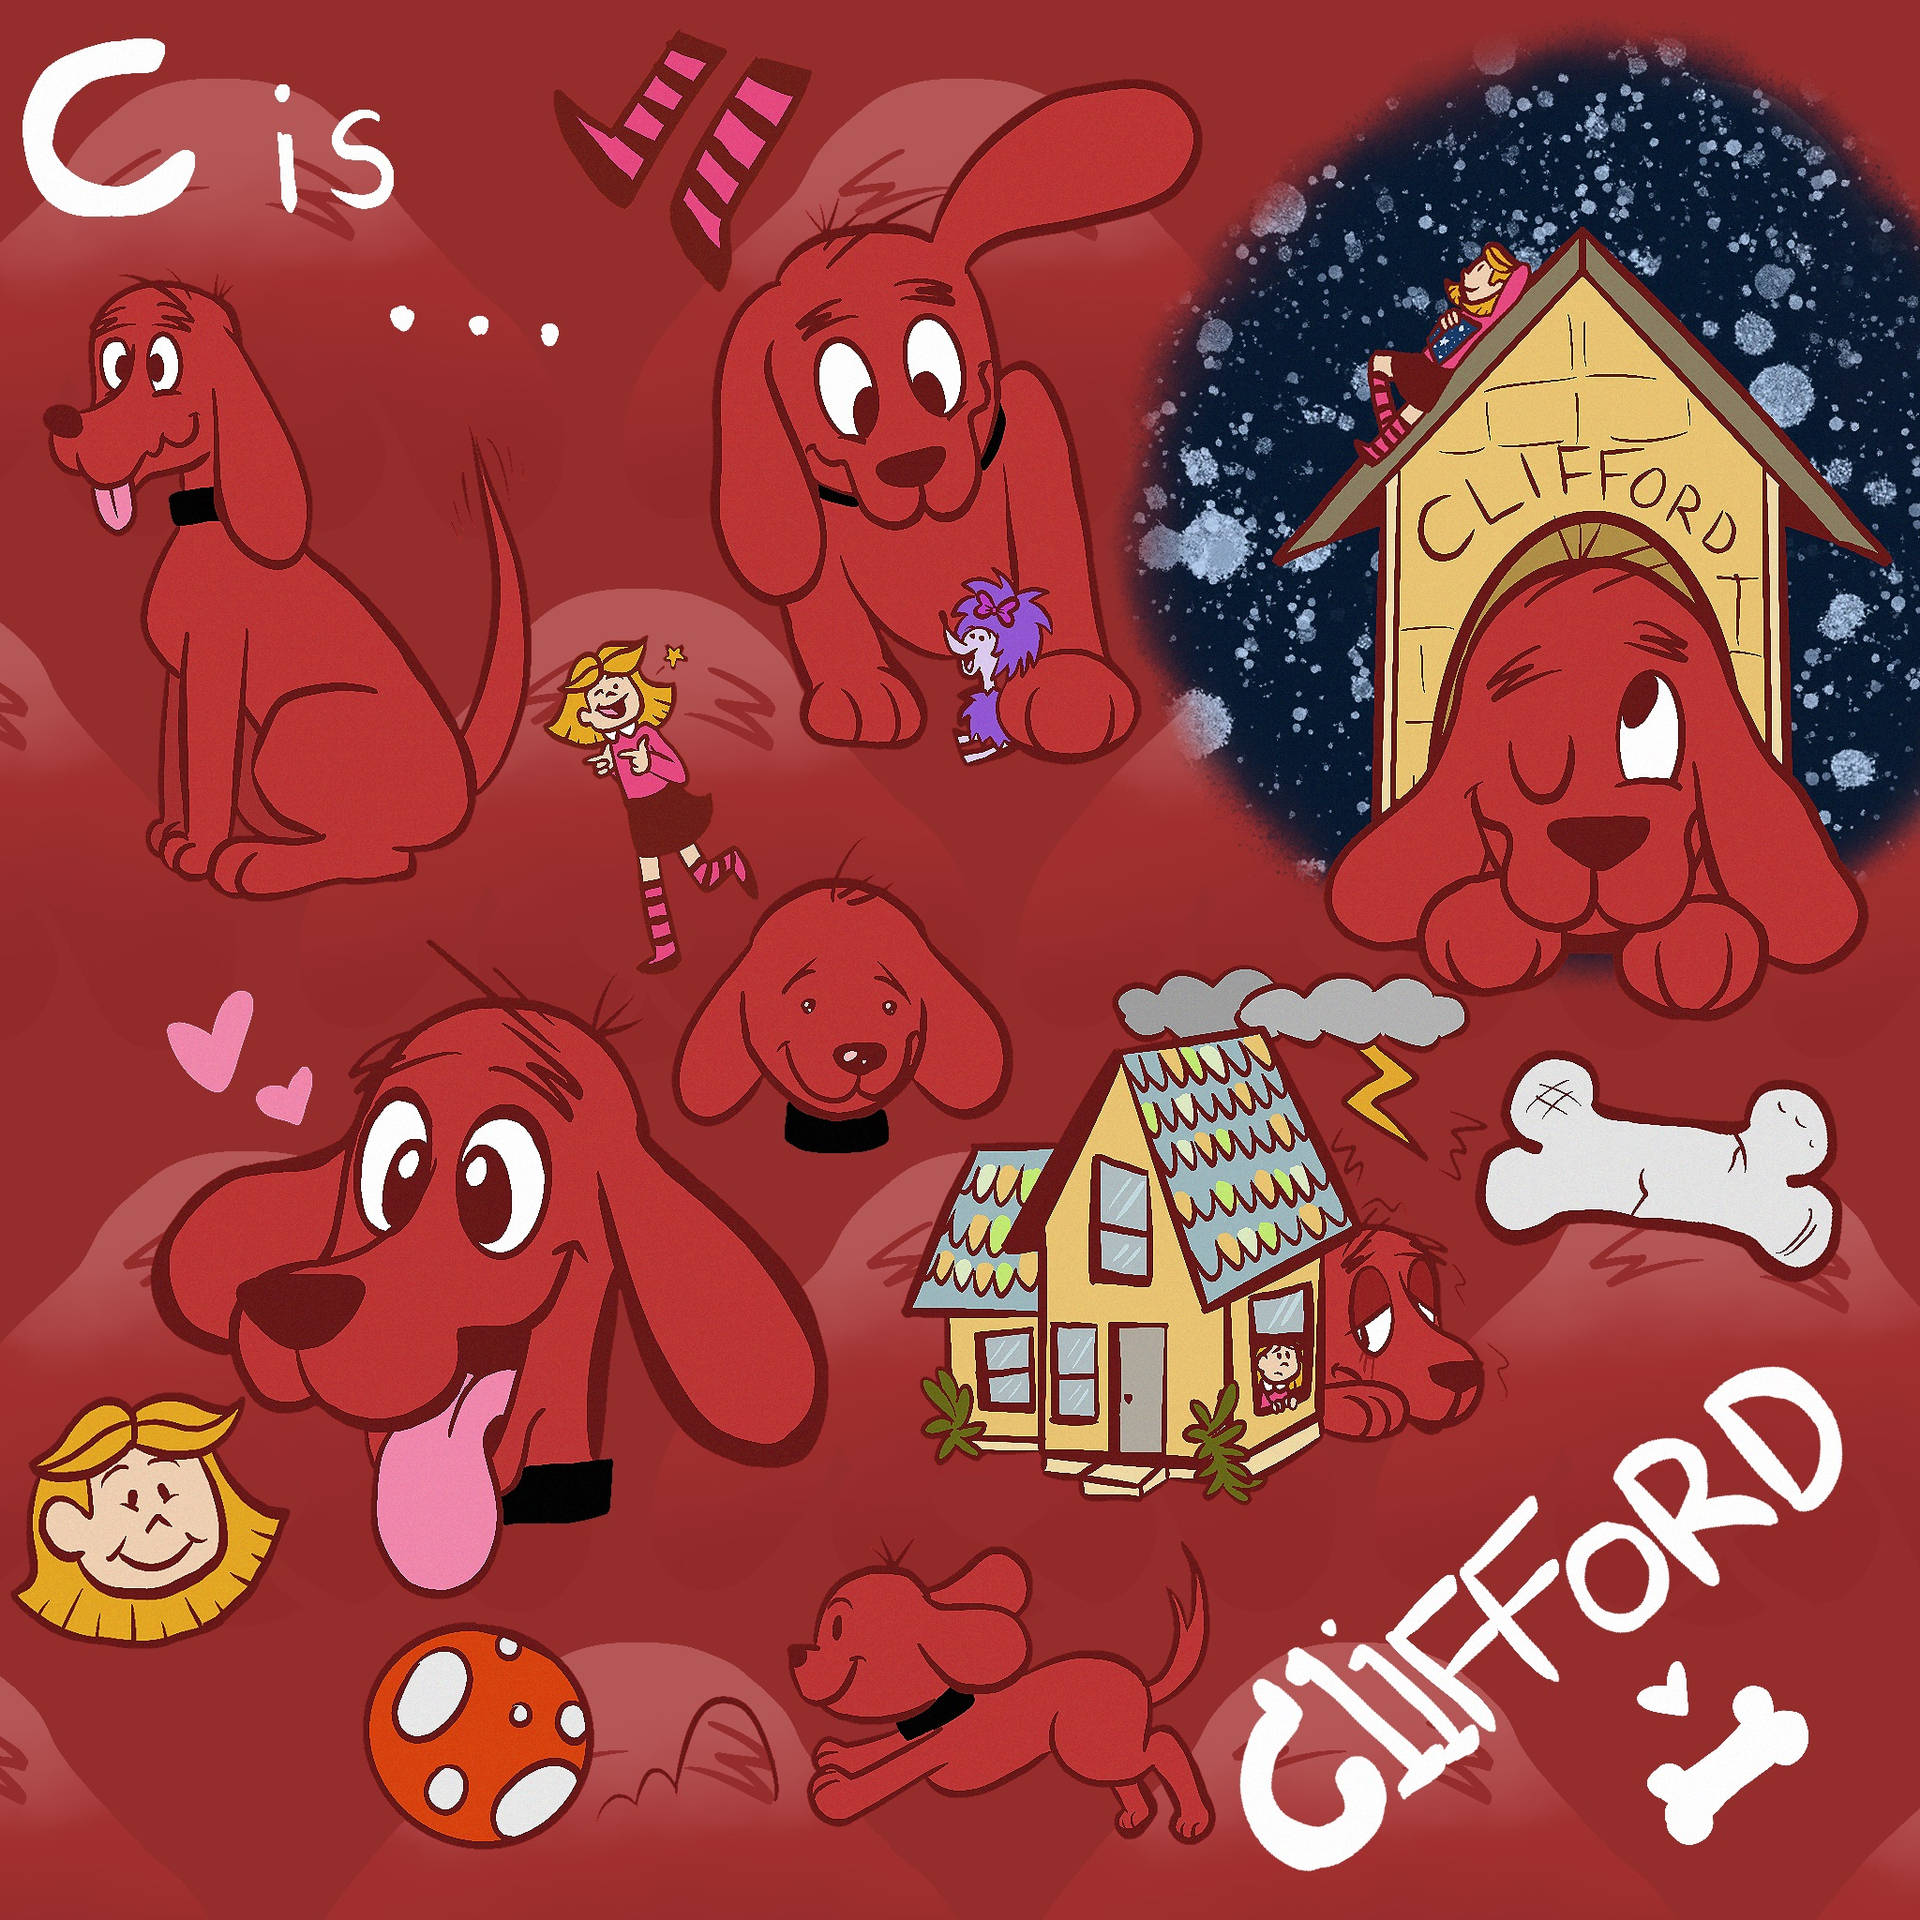 A Joyful Clifford, The Big Red Dog In Action Background